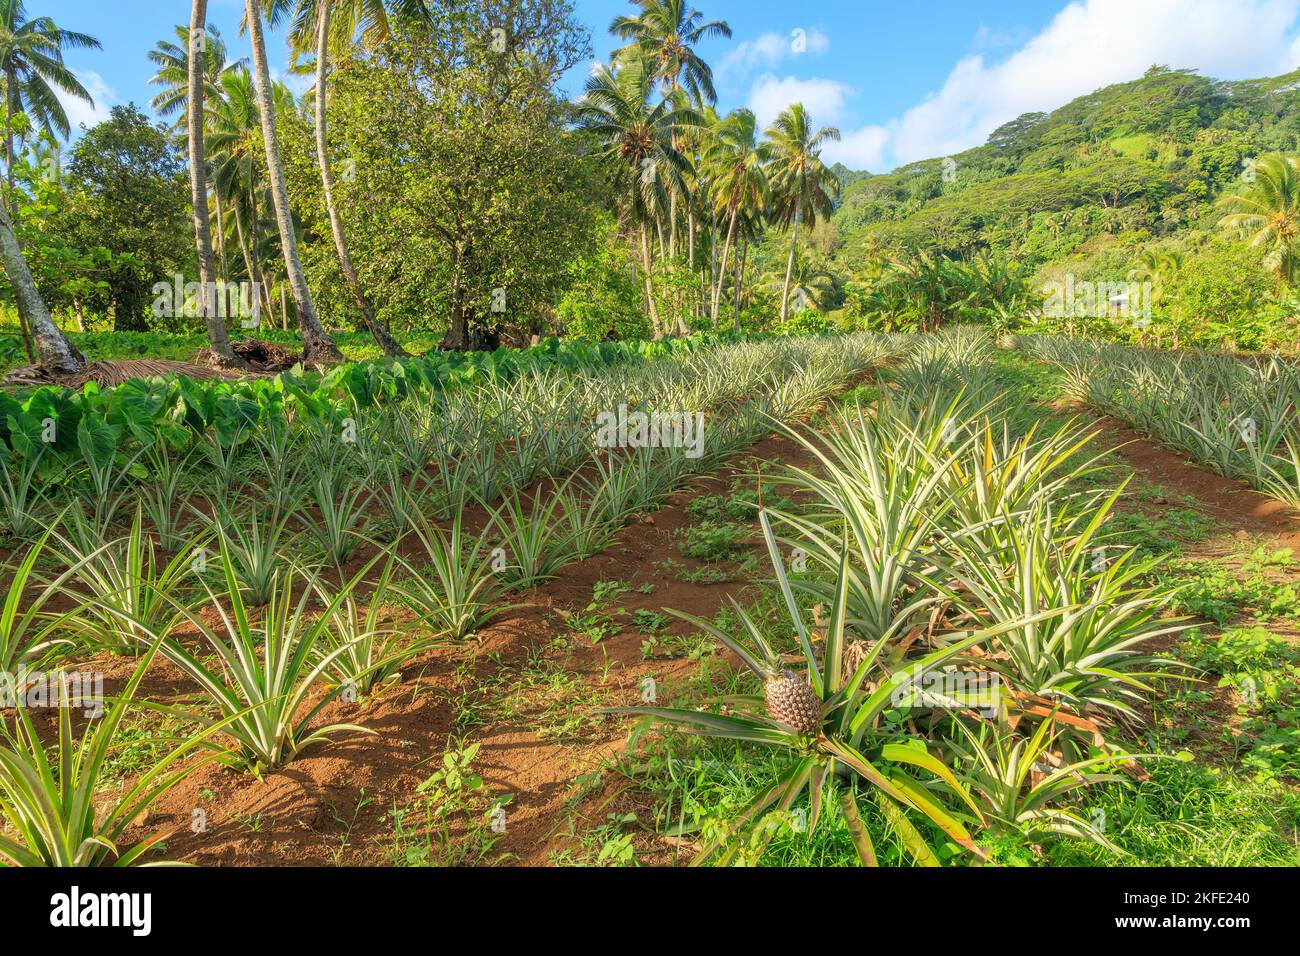 Young pineapple plants growing in a plantation on the tropical island of Rarotonga, Cook Islands Stock Photo